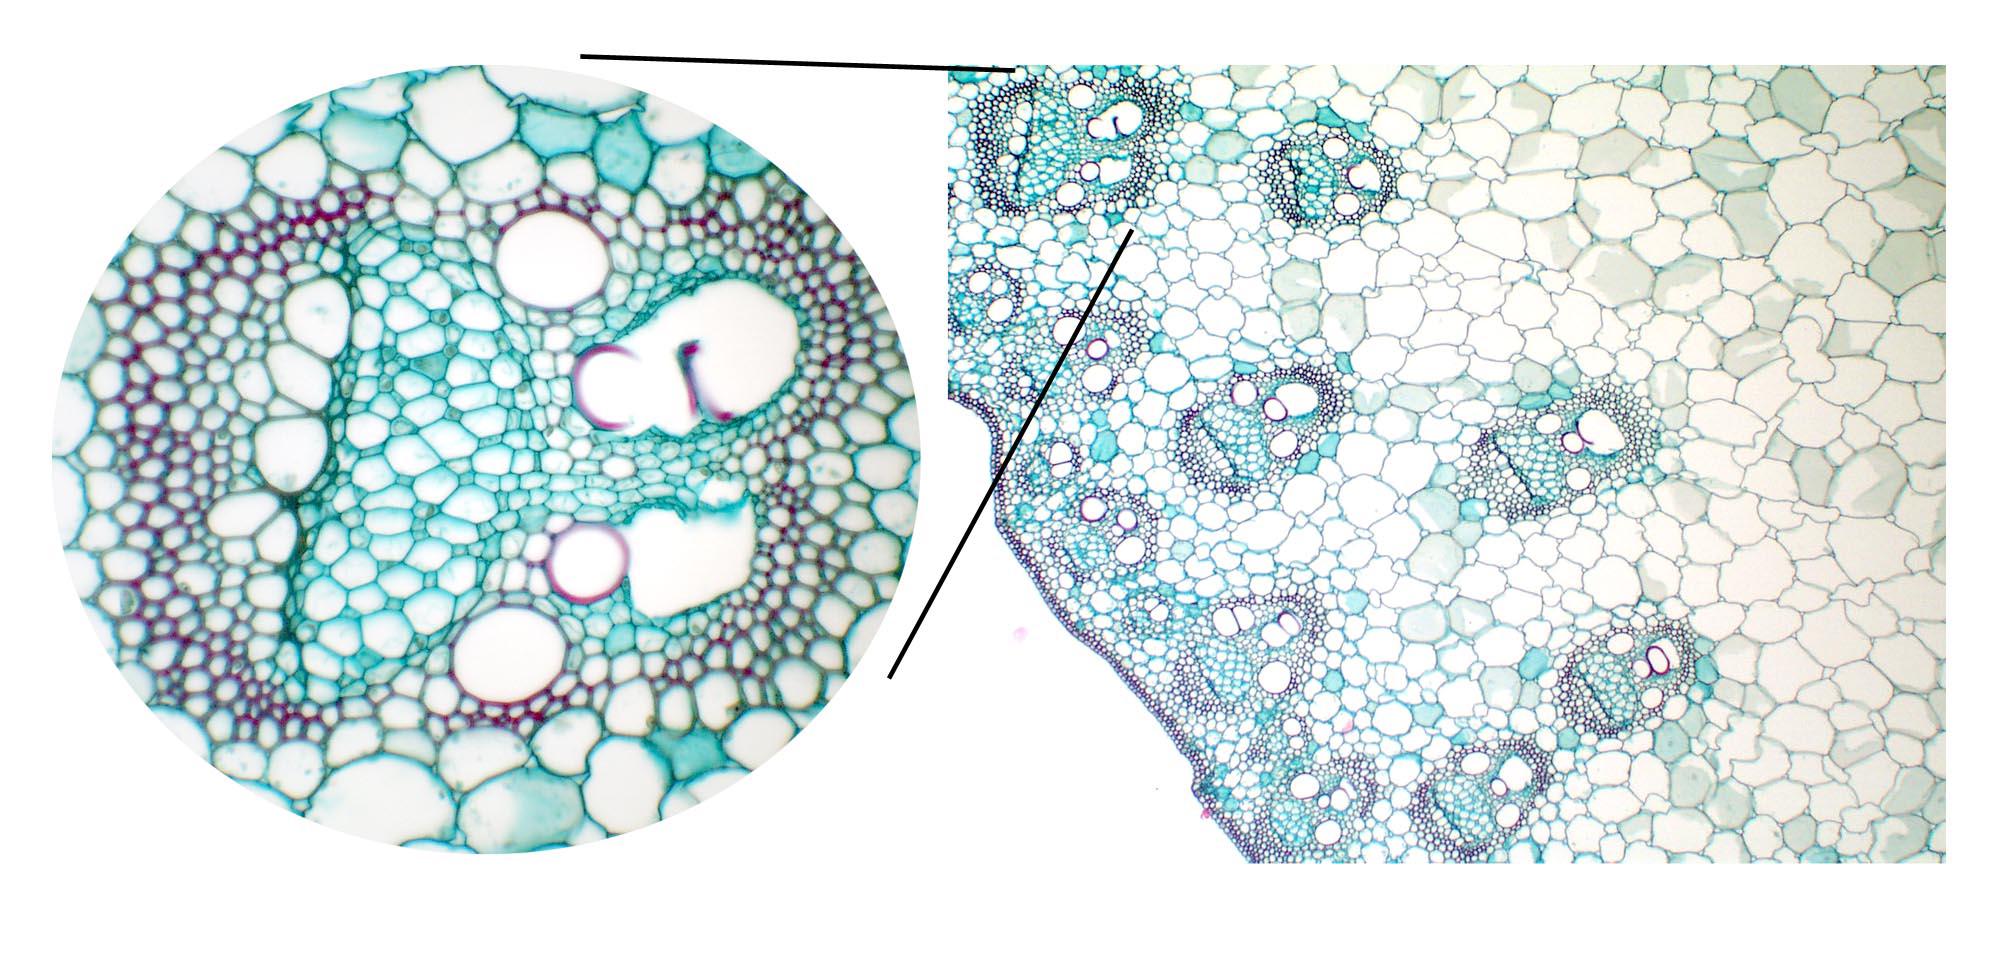 ‎composite Of Scattered Vascular Bundles With Detail Of One Bundle In